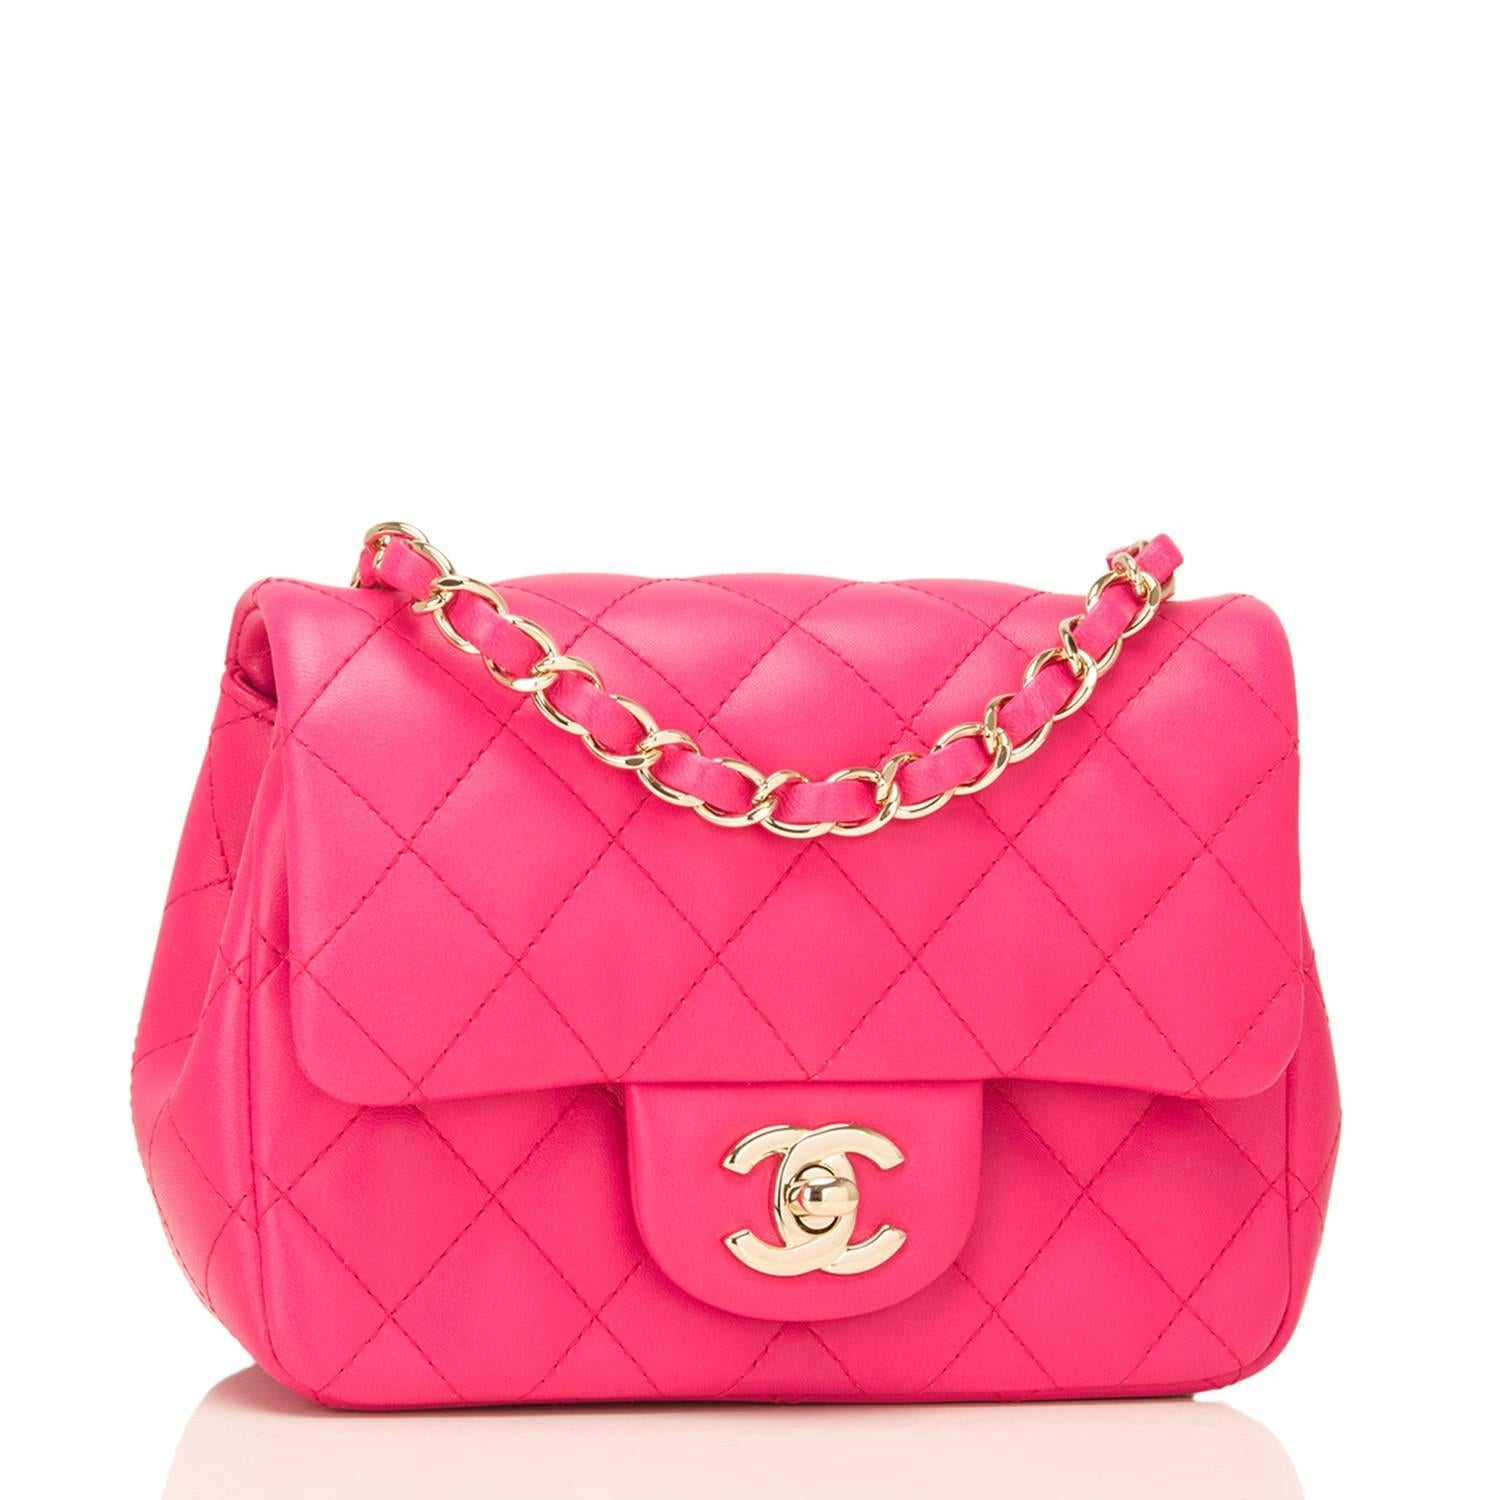 Chanel Square Mini Classic flap bag of fuchsia lambskin leather with silver tone hardware.

This bag has a front flap with CC turnlock closure, a half moon back pocket, and an interwoven chain link with fuchsia leather shoulder/crossbody strap.

The